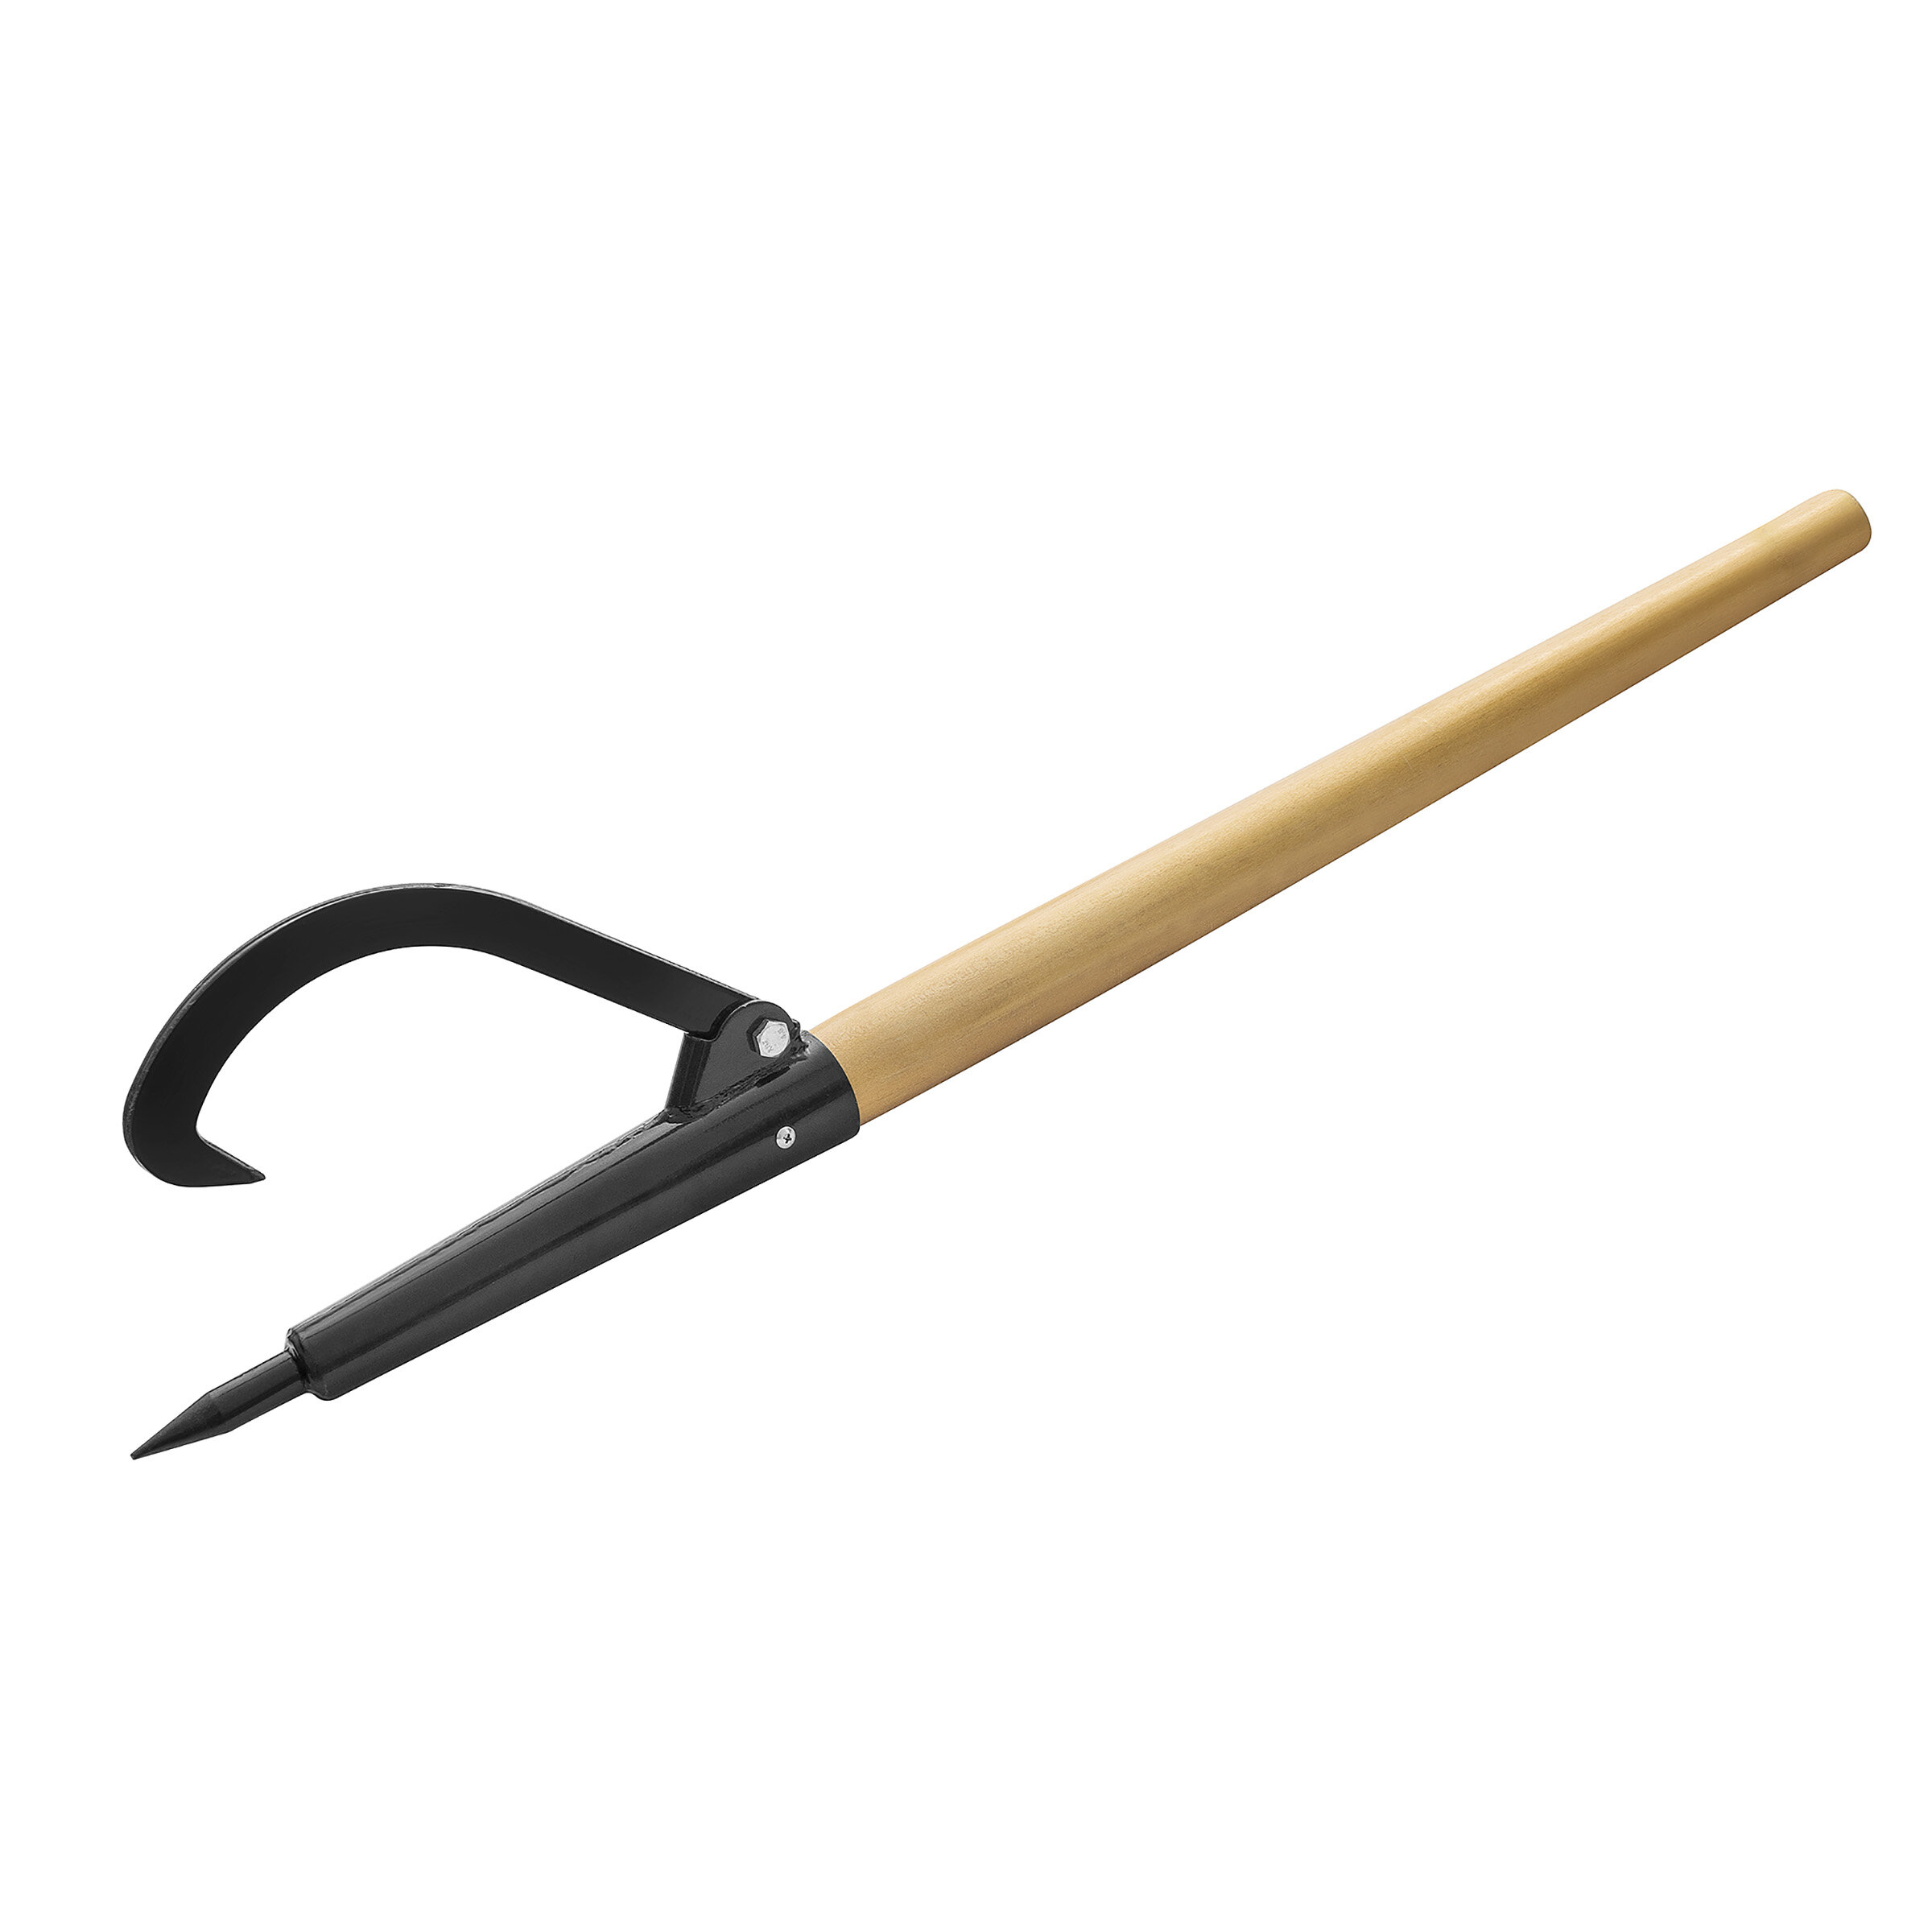 Pure Garden Log Peavey And Cant Hook Tool – 49-Inch Wood Handle For  Separating Stacked Firewood - Retractable 18-Inch Opening For Turning Logs  By Earth Worth - Wayfair Canada